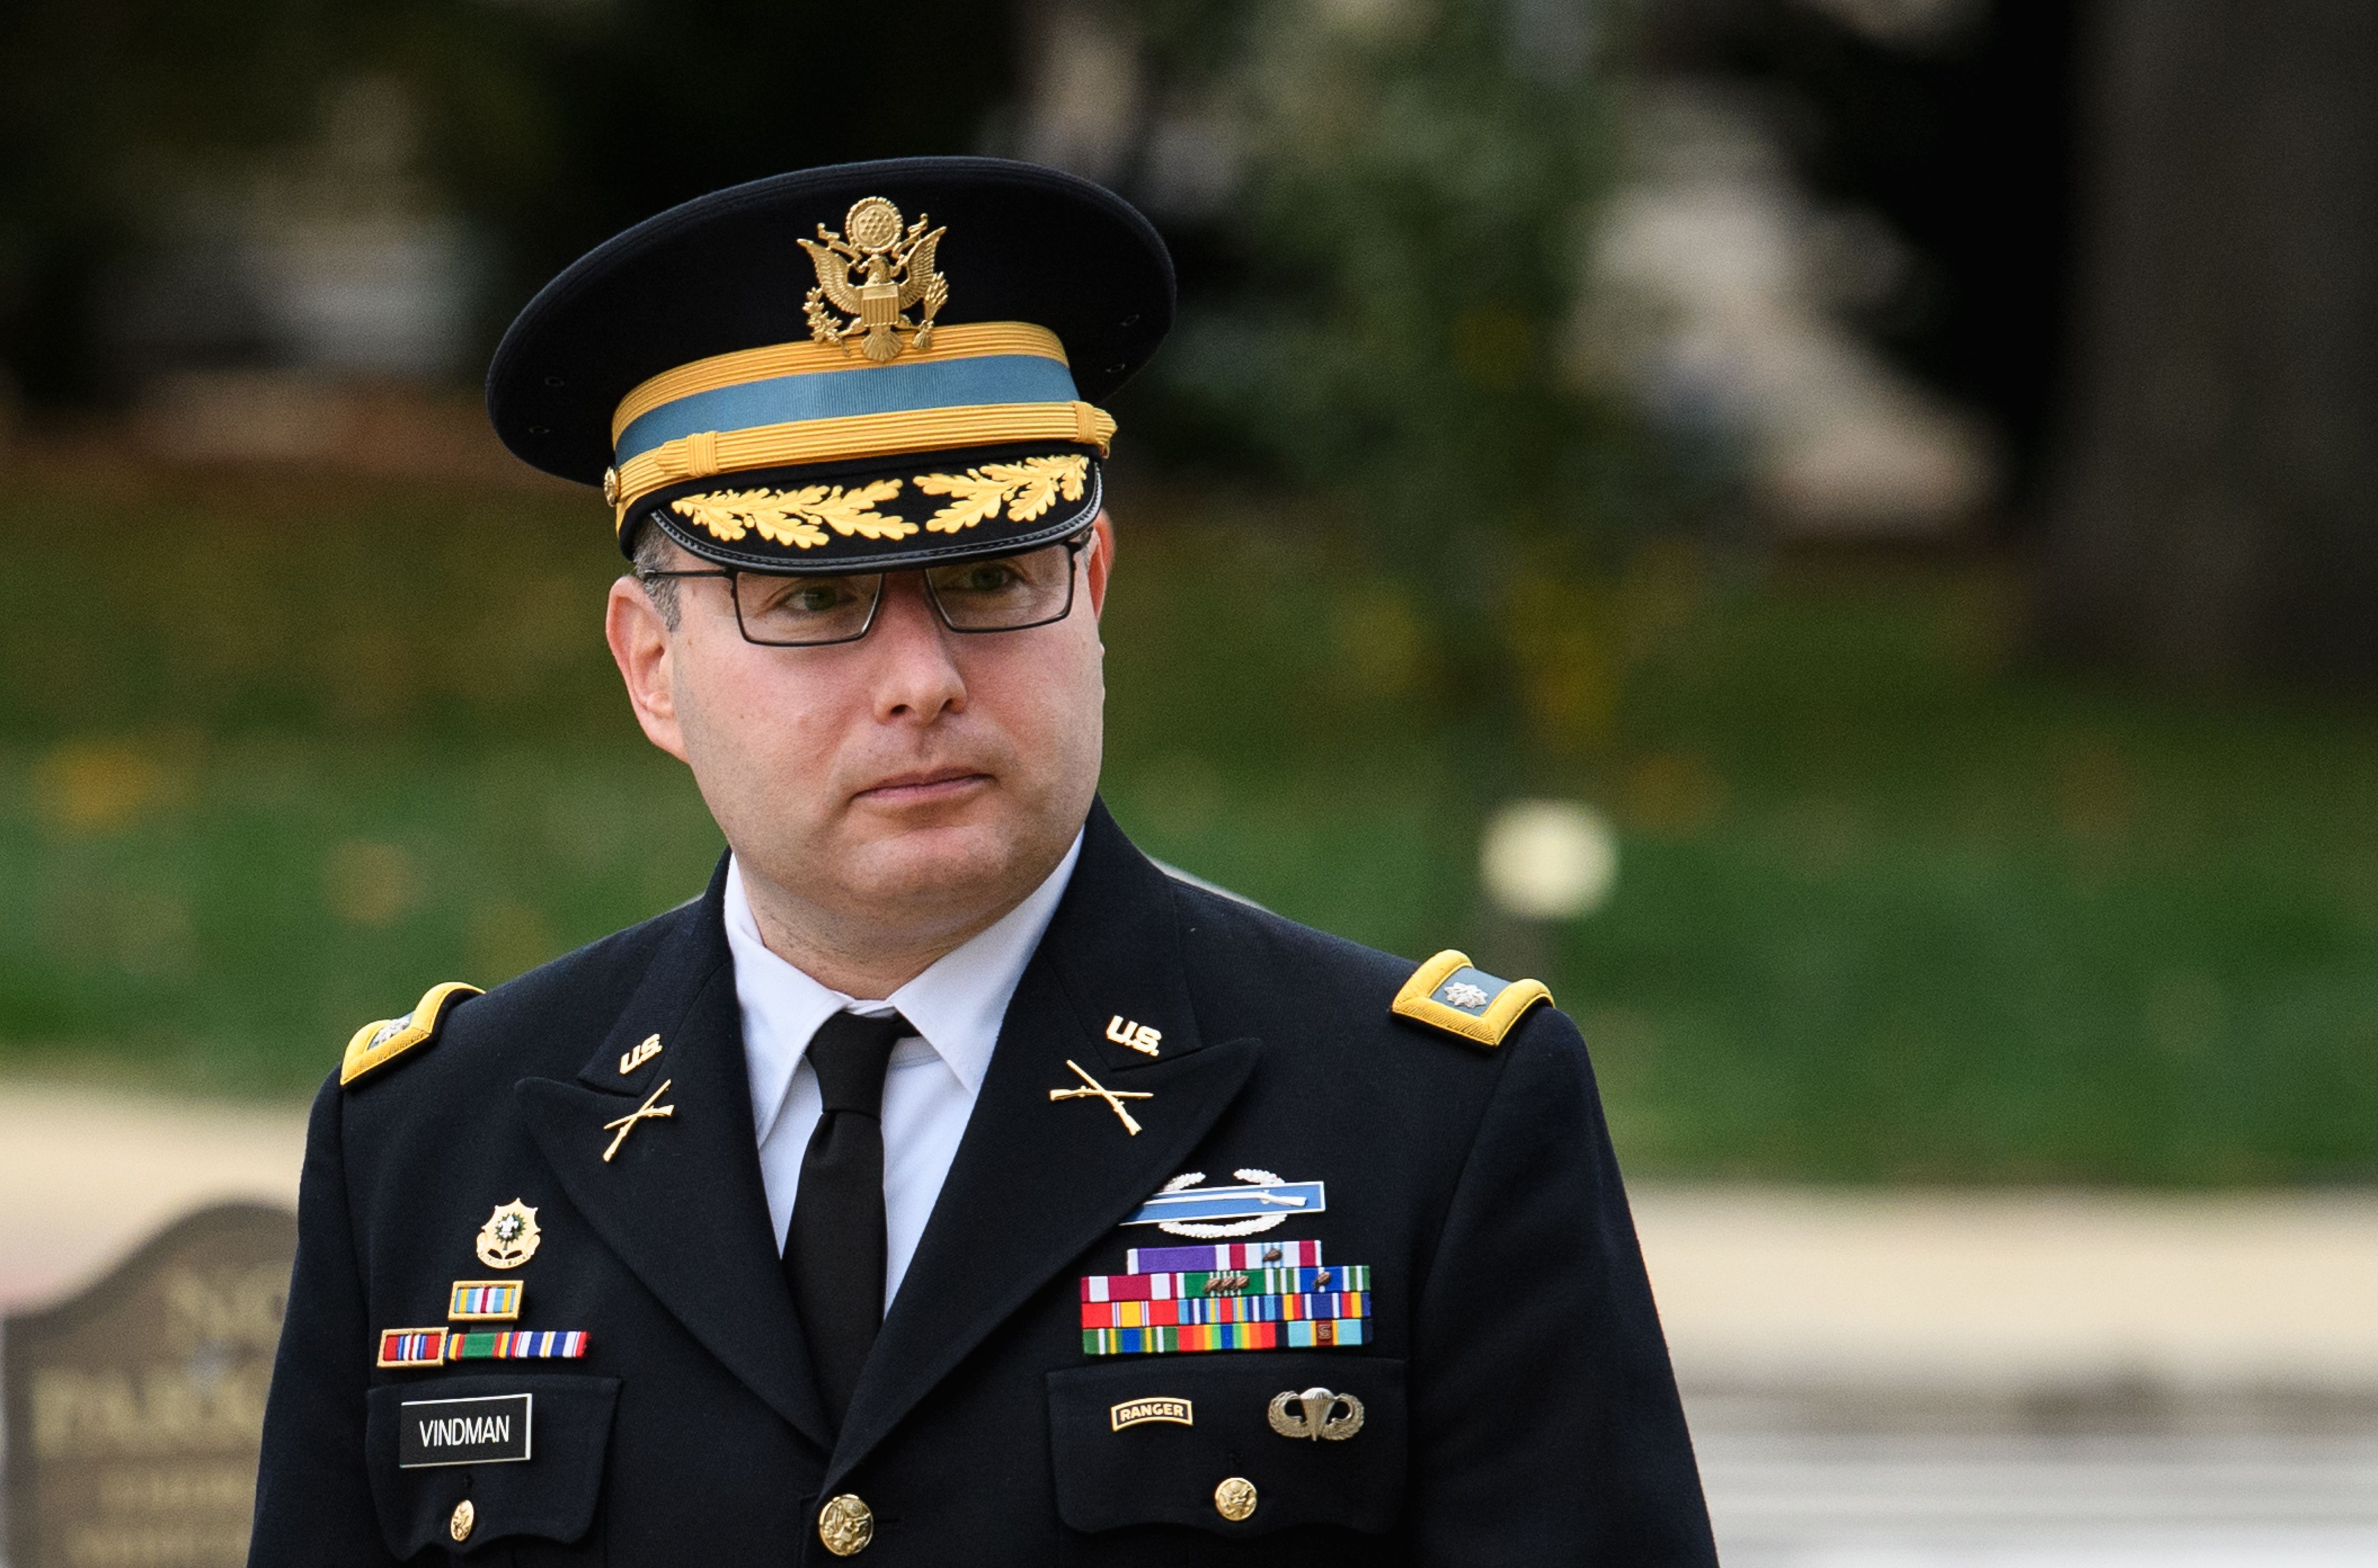 Army Lt. Col. Alexander Vindman, the National Security Council's top Ukraine expert, arrives for a closed-door deposition at the US Capitol in Washington, DC on Oct. 29. 